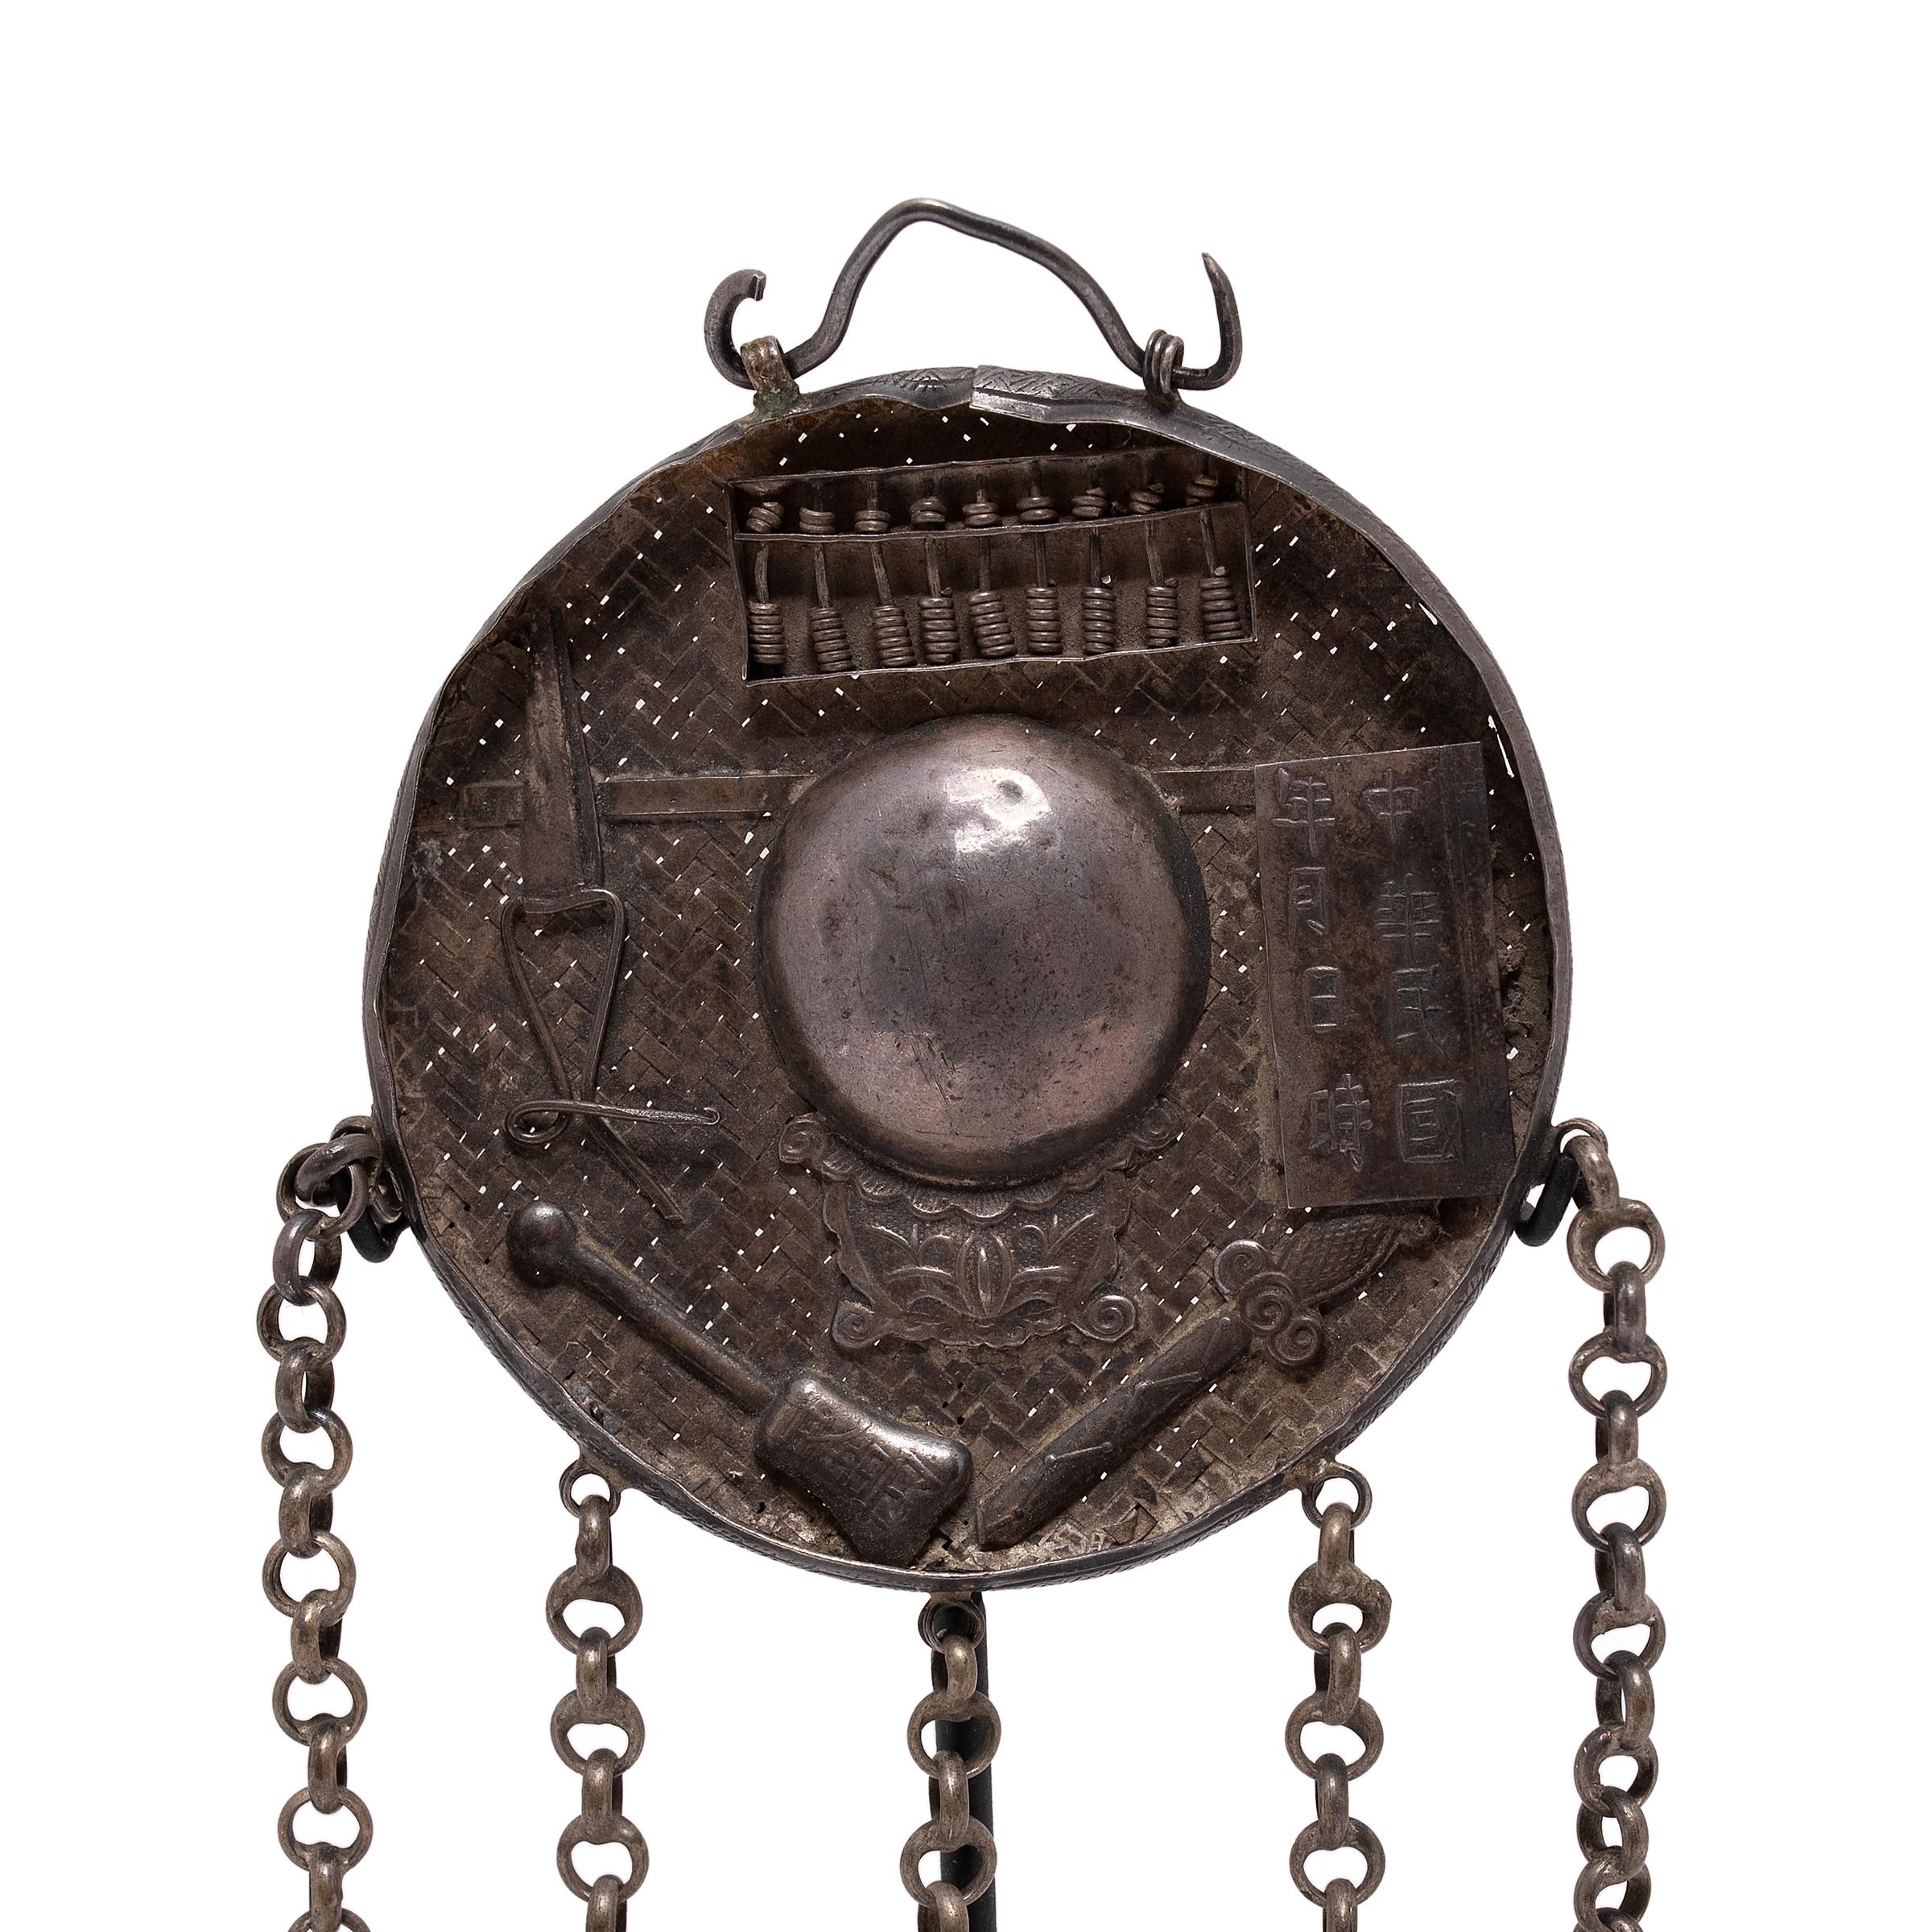 Qing Silver Chinese Merchant's Charm with Bells, c. 1900